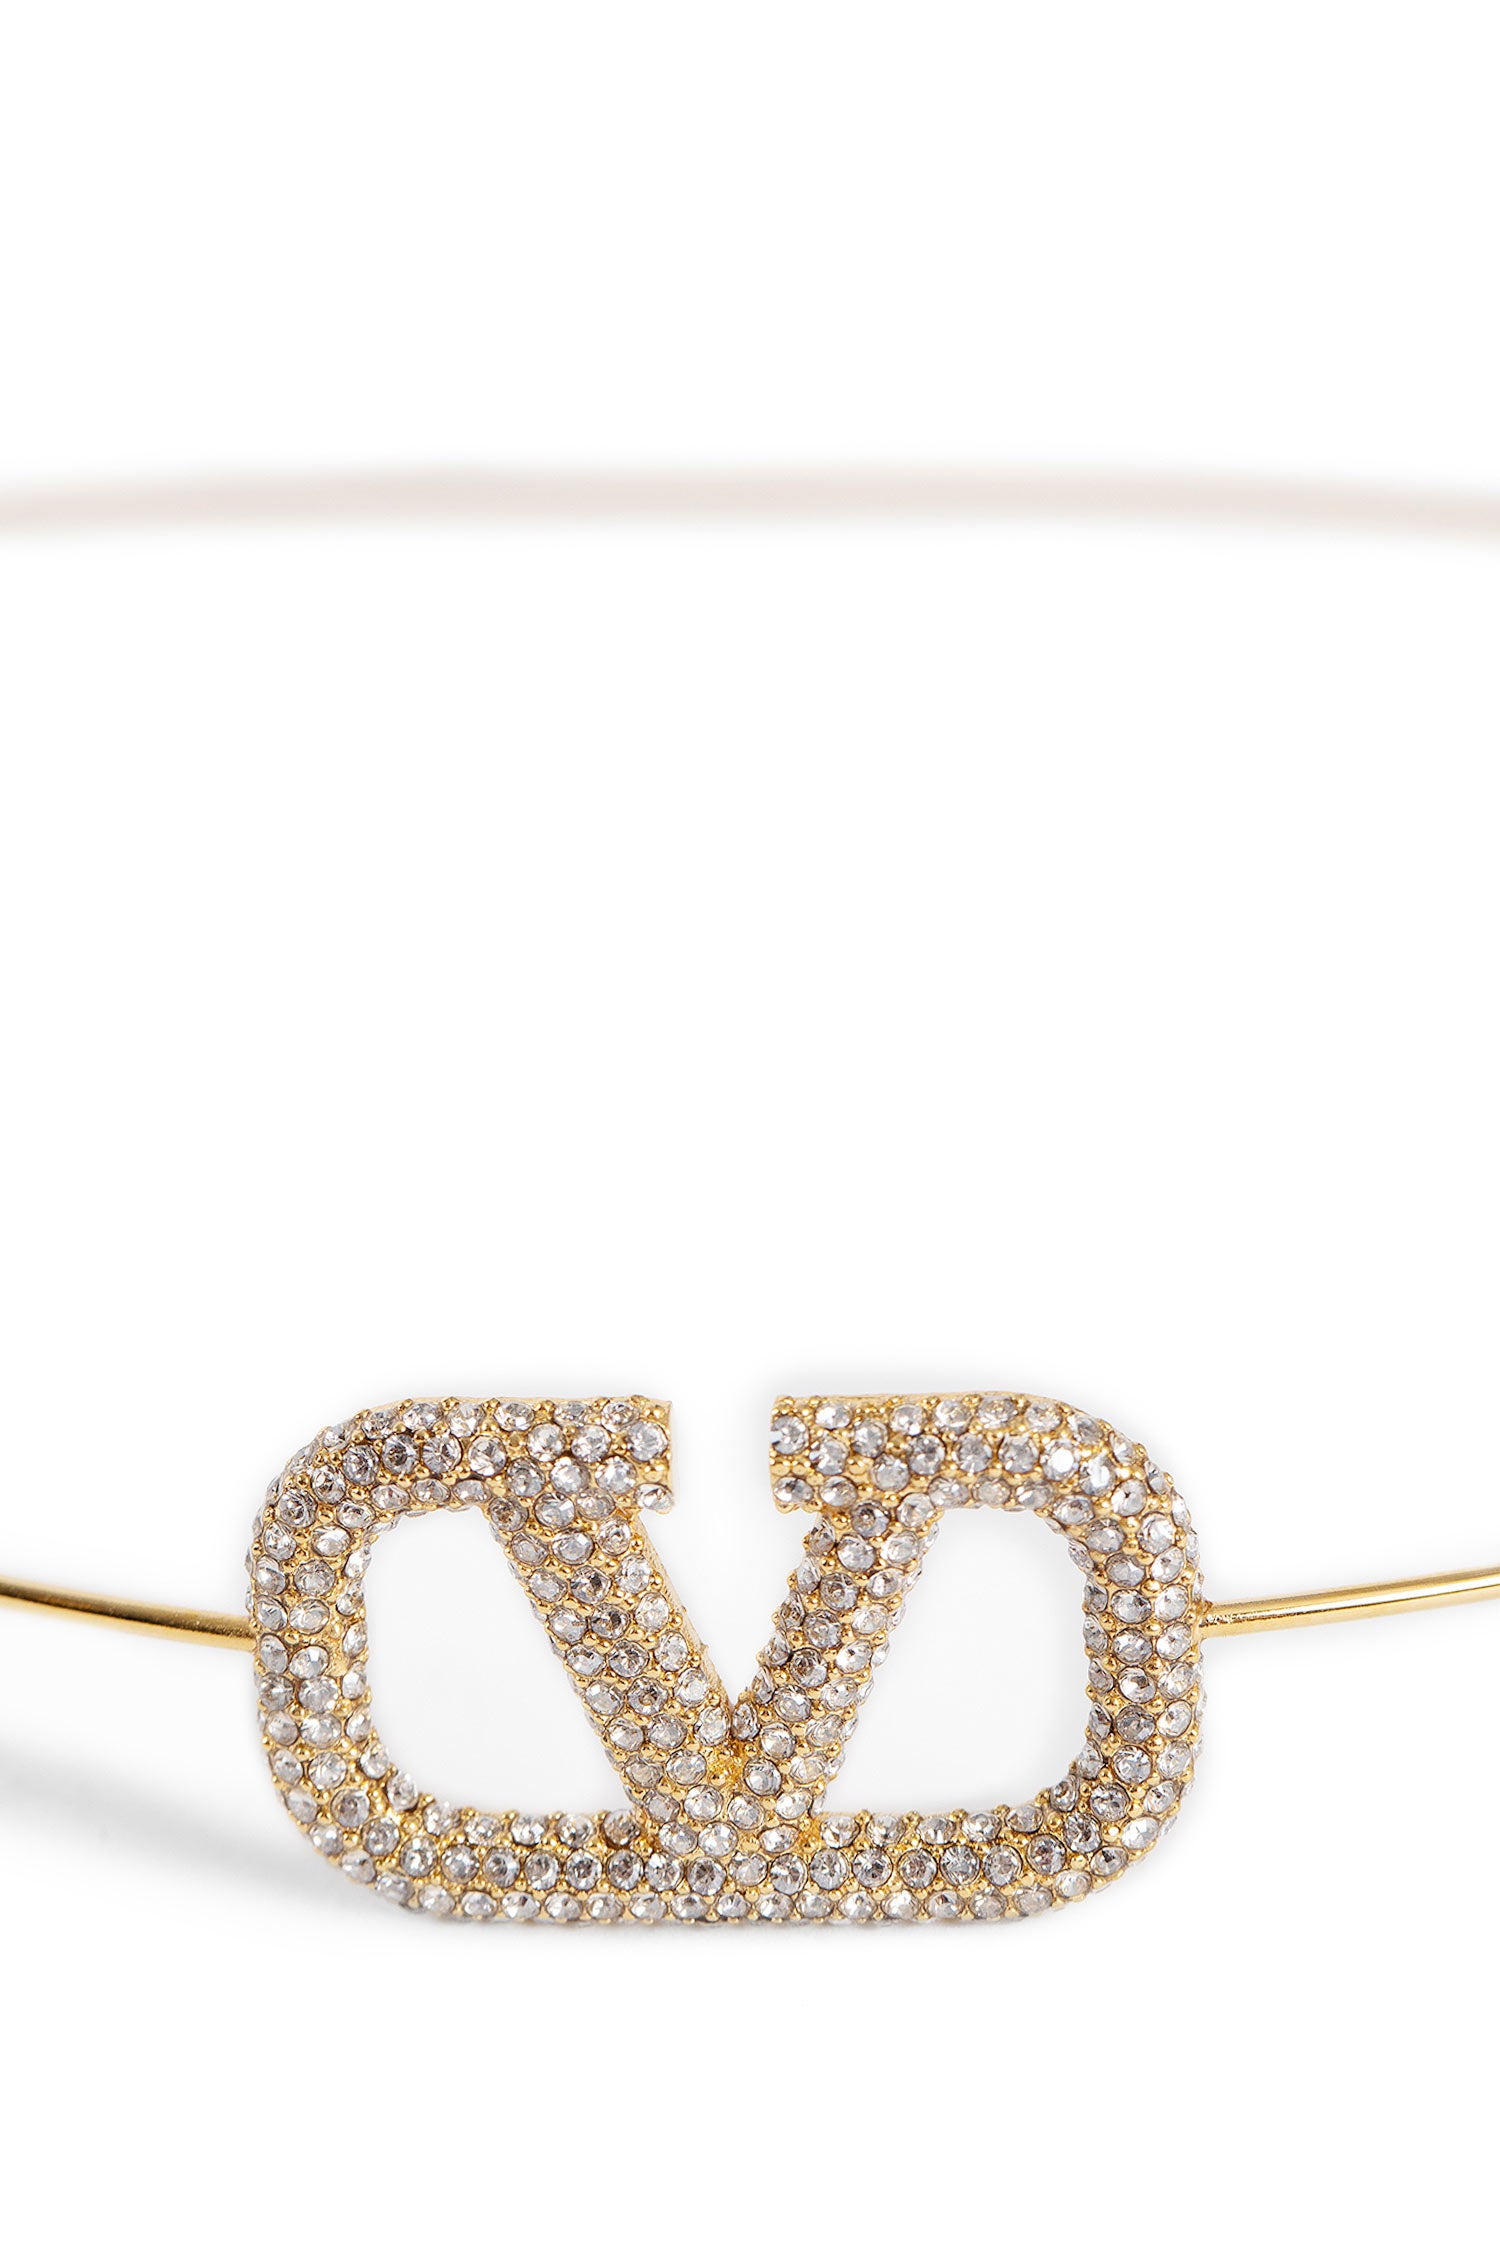 VALENTINO WOMAN GOLD HAIR ACCESSORIES